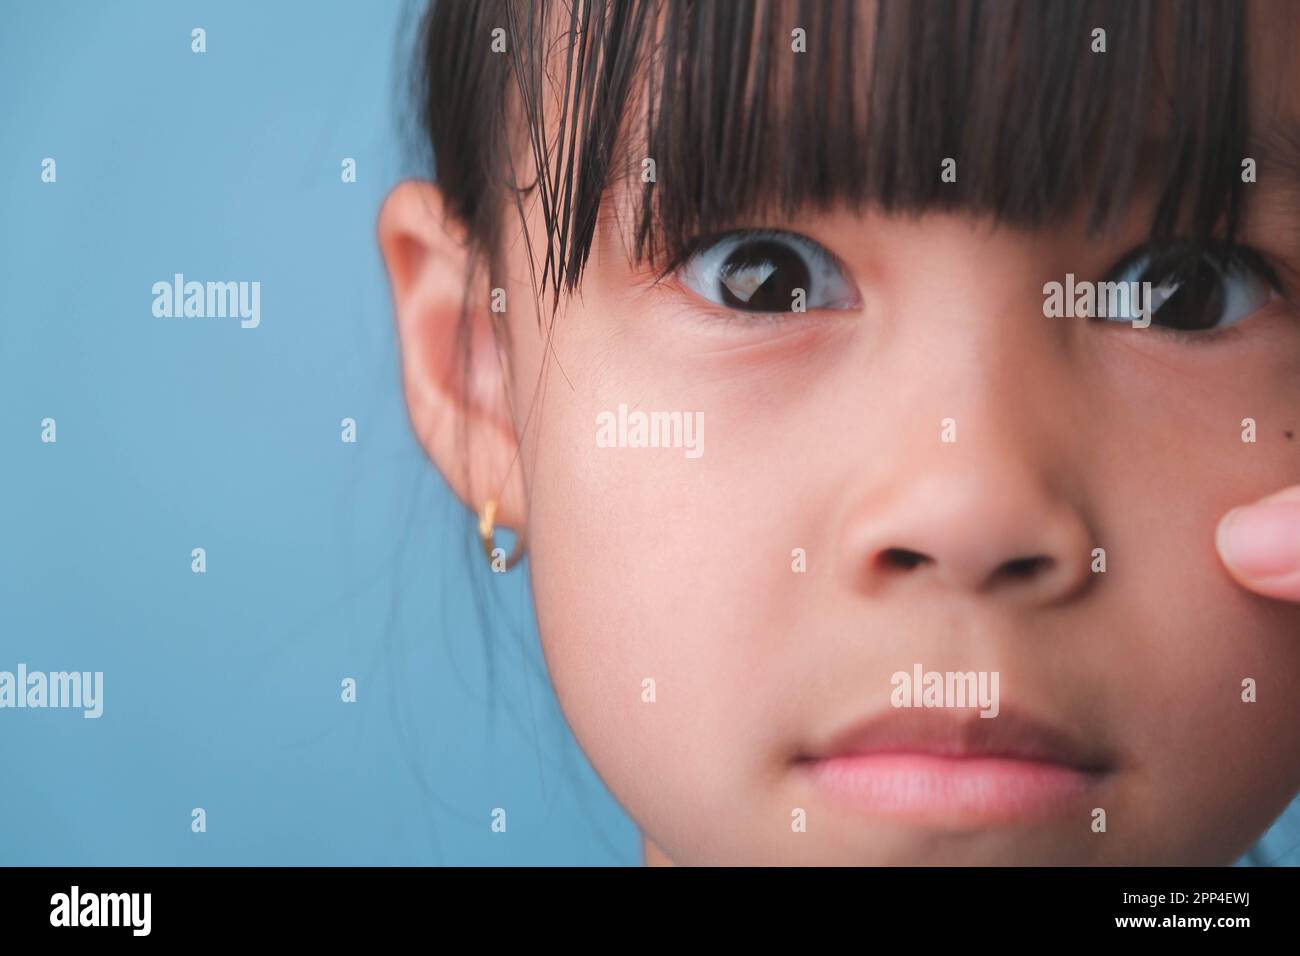 Close-up portrait of surprised young Asian girl isolated on blue background. Cute shocked young girl with big black eyes reacts surprisingly to someth Stock Photo